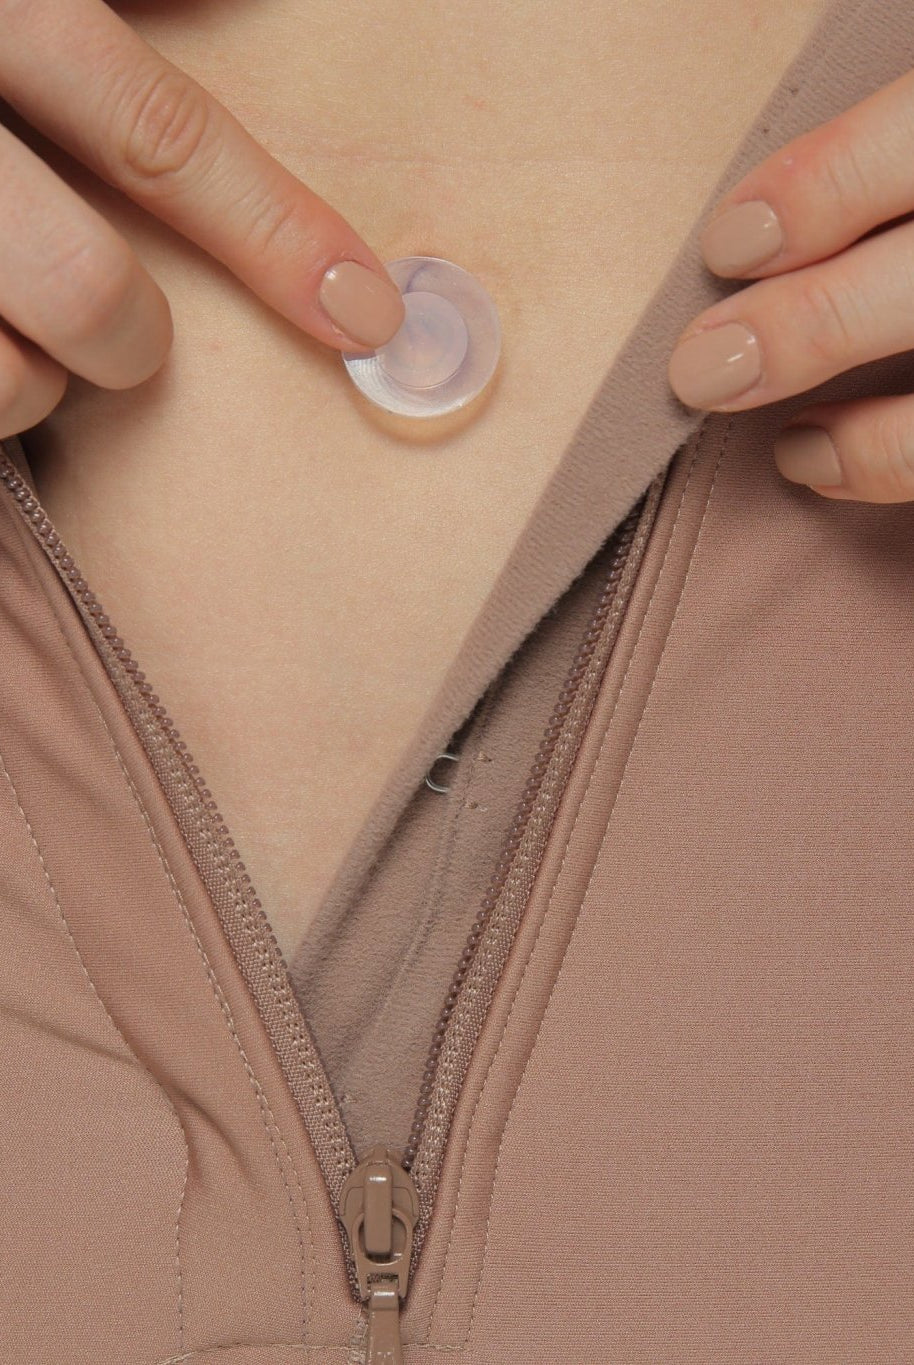 The Original Belly Button Plug Shaper Silicone After Surgery - Sexyskinz Shapewear Fajas